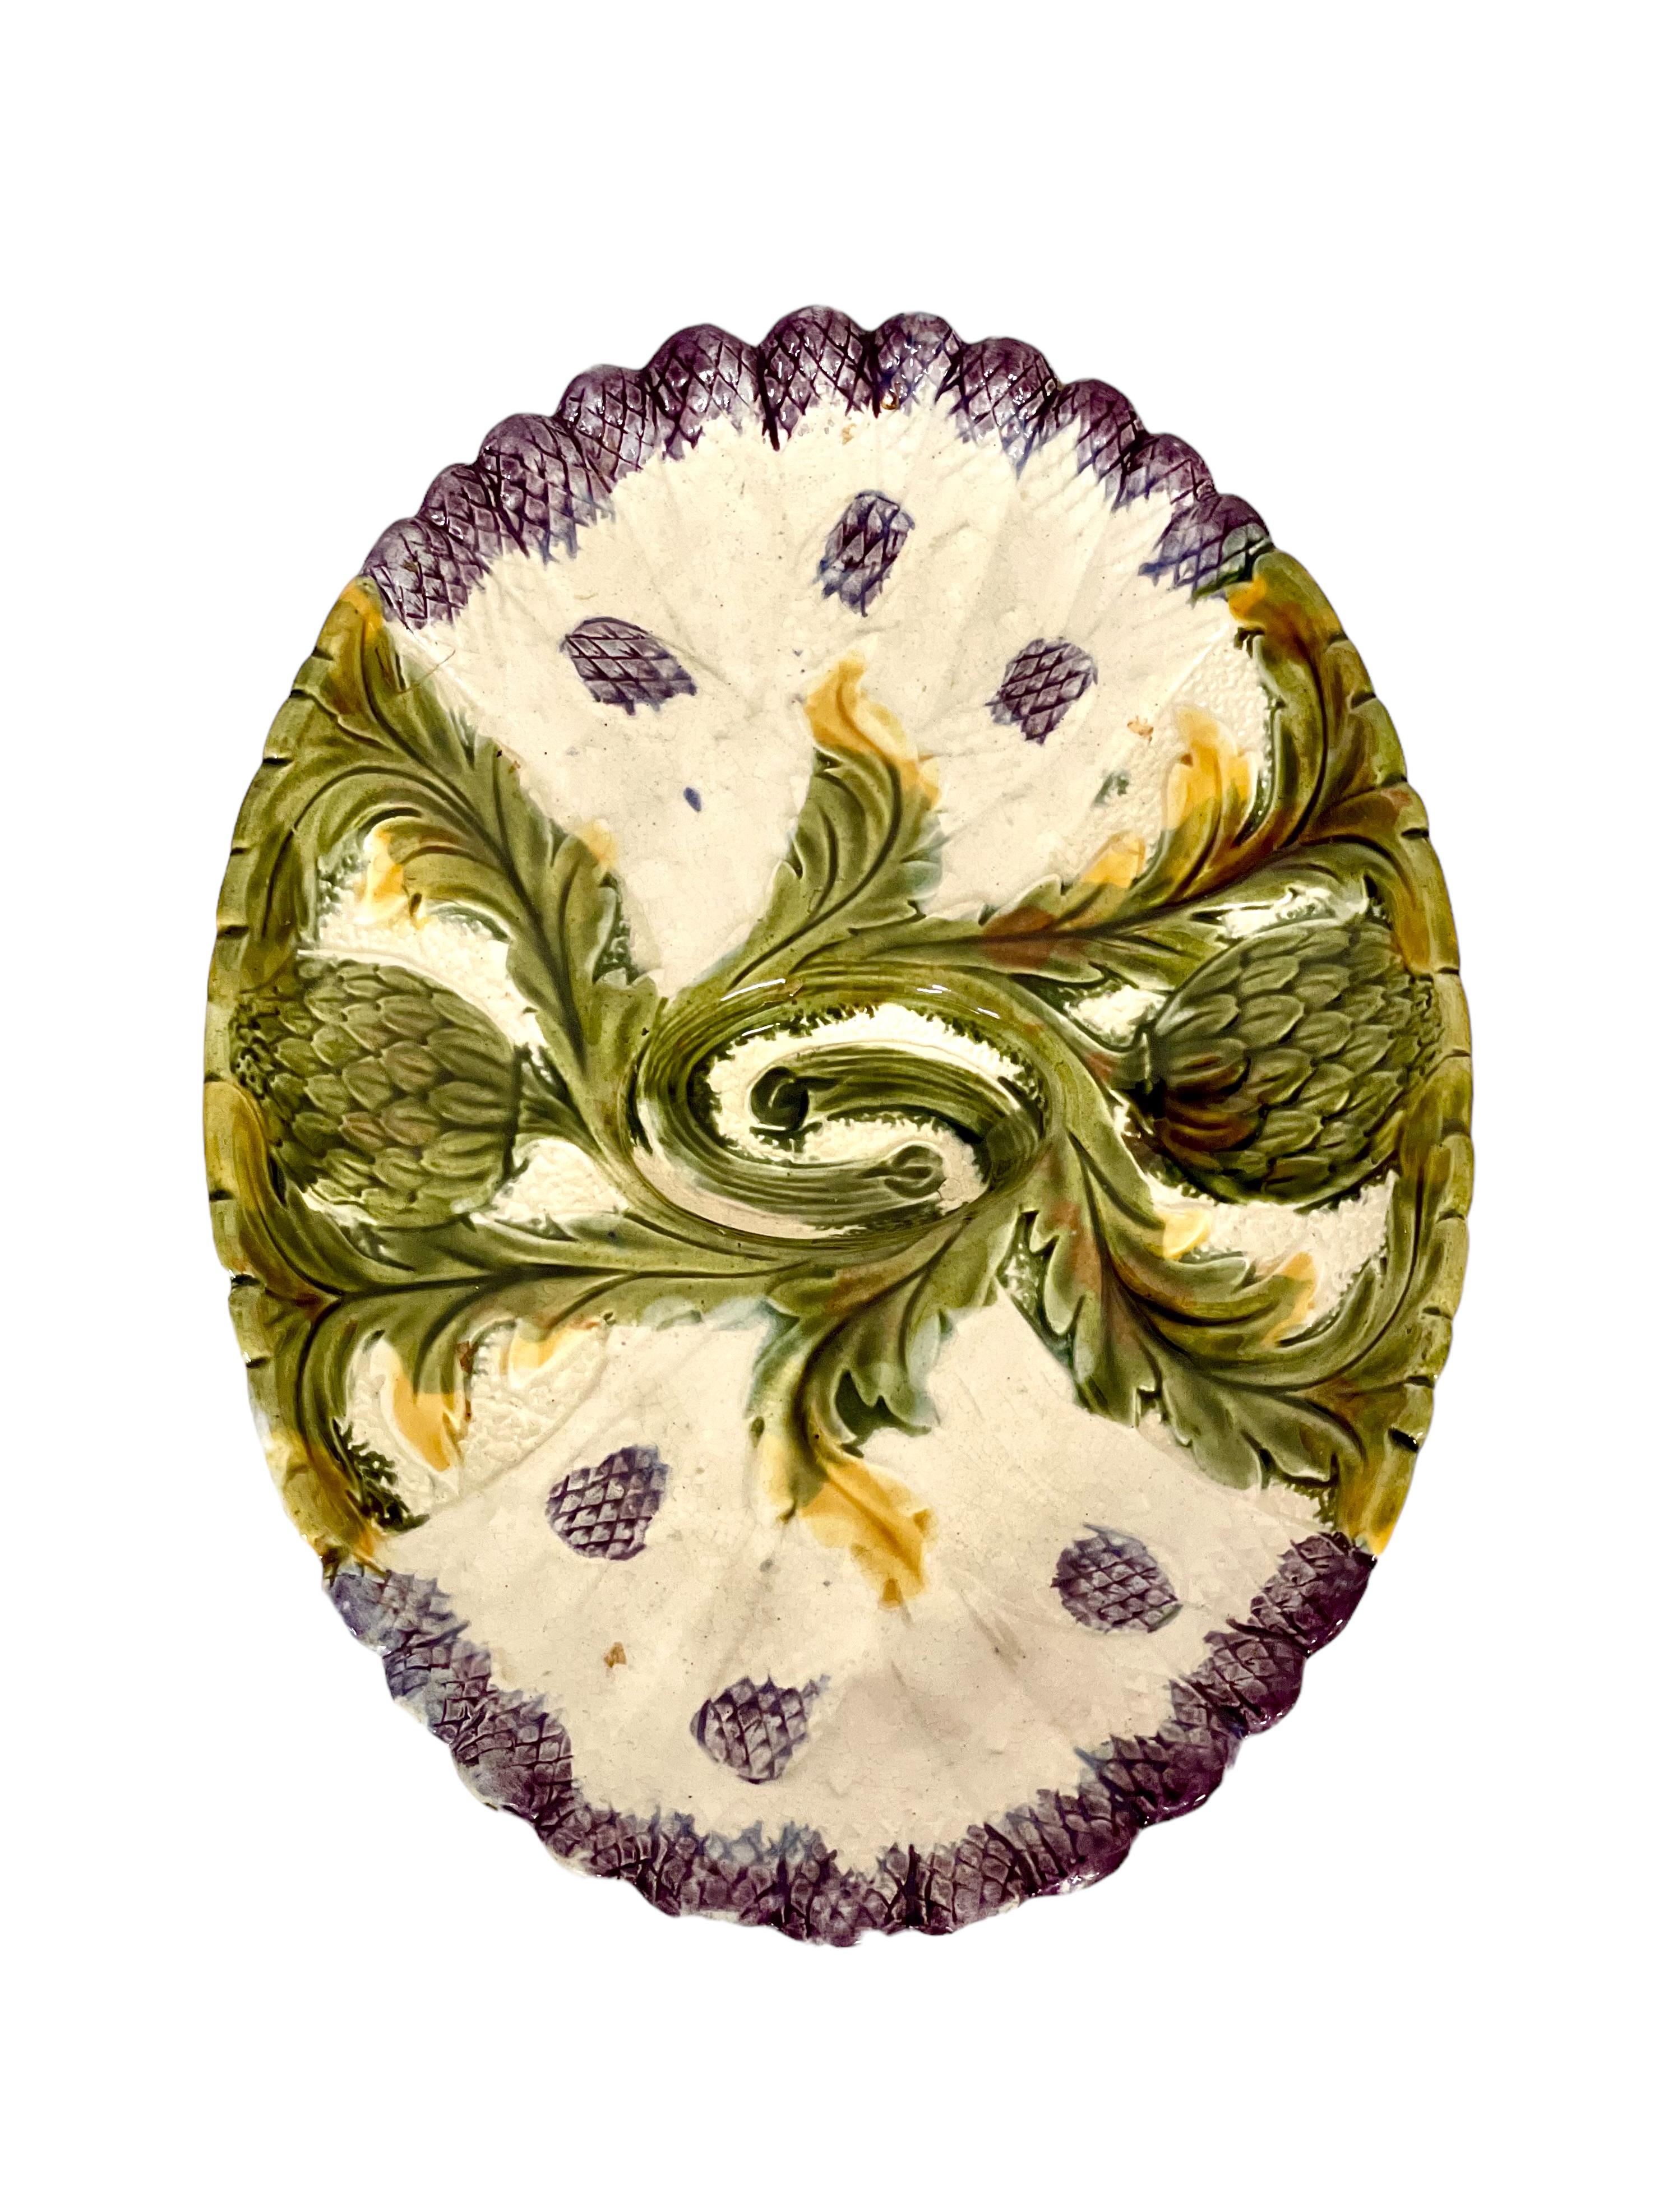 19th Century French Oval Shaped Majolica Asparagus Serving Platter For Sale 3